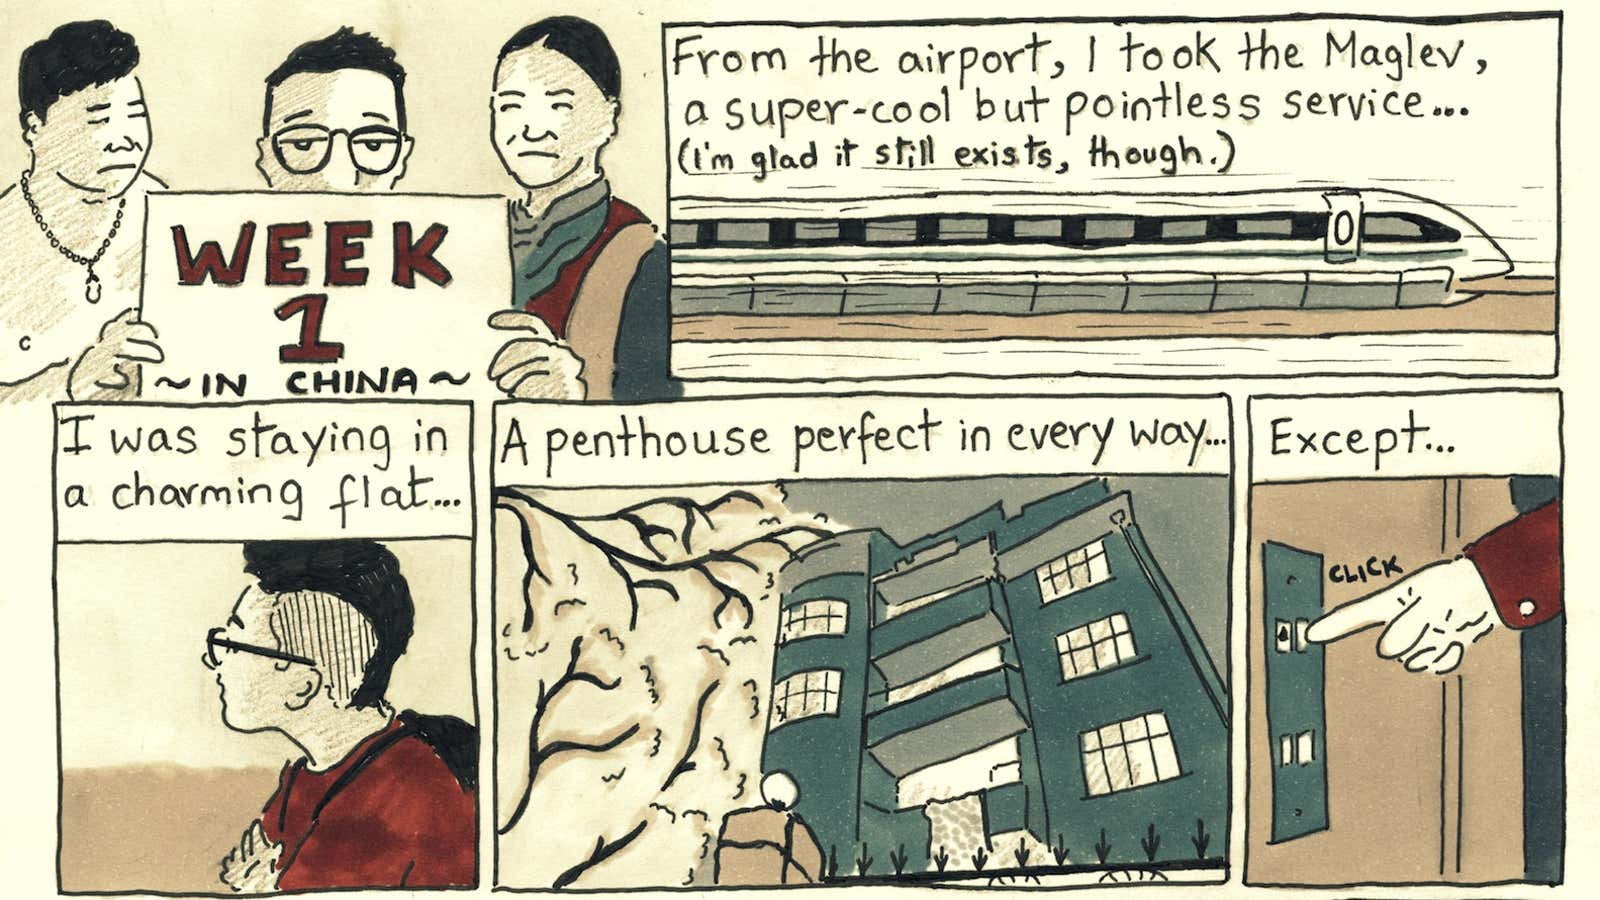 In comics: An Indian in China